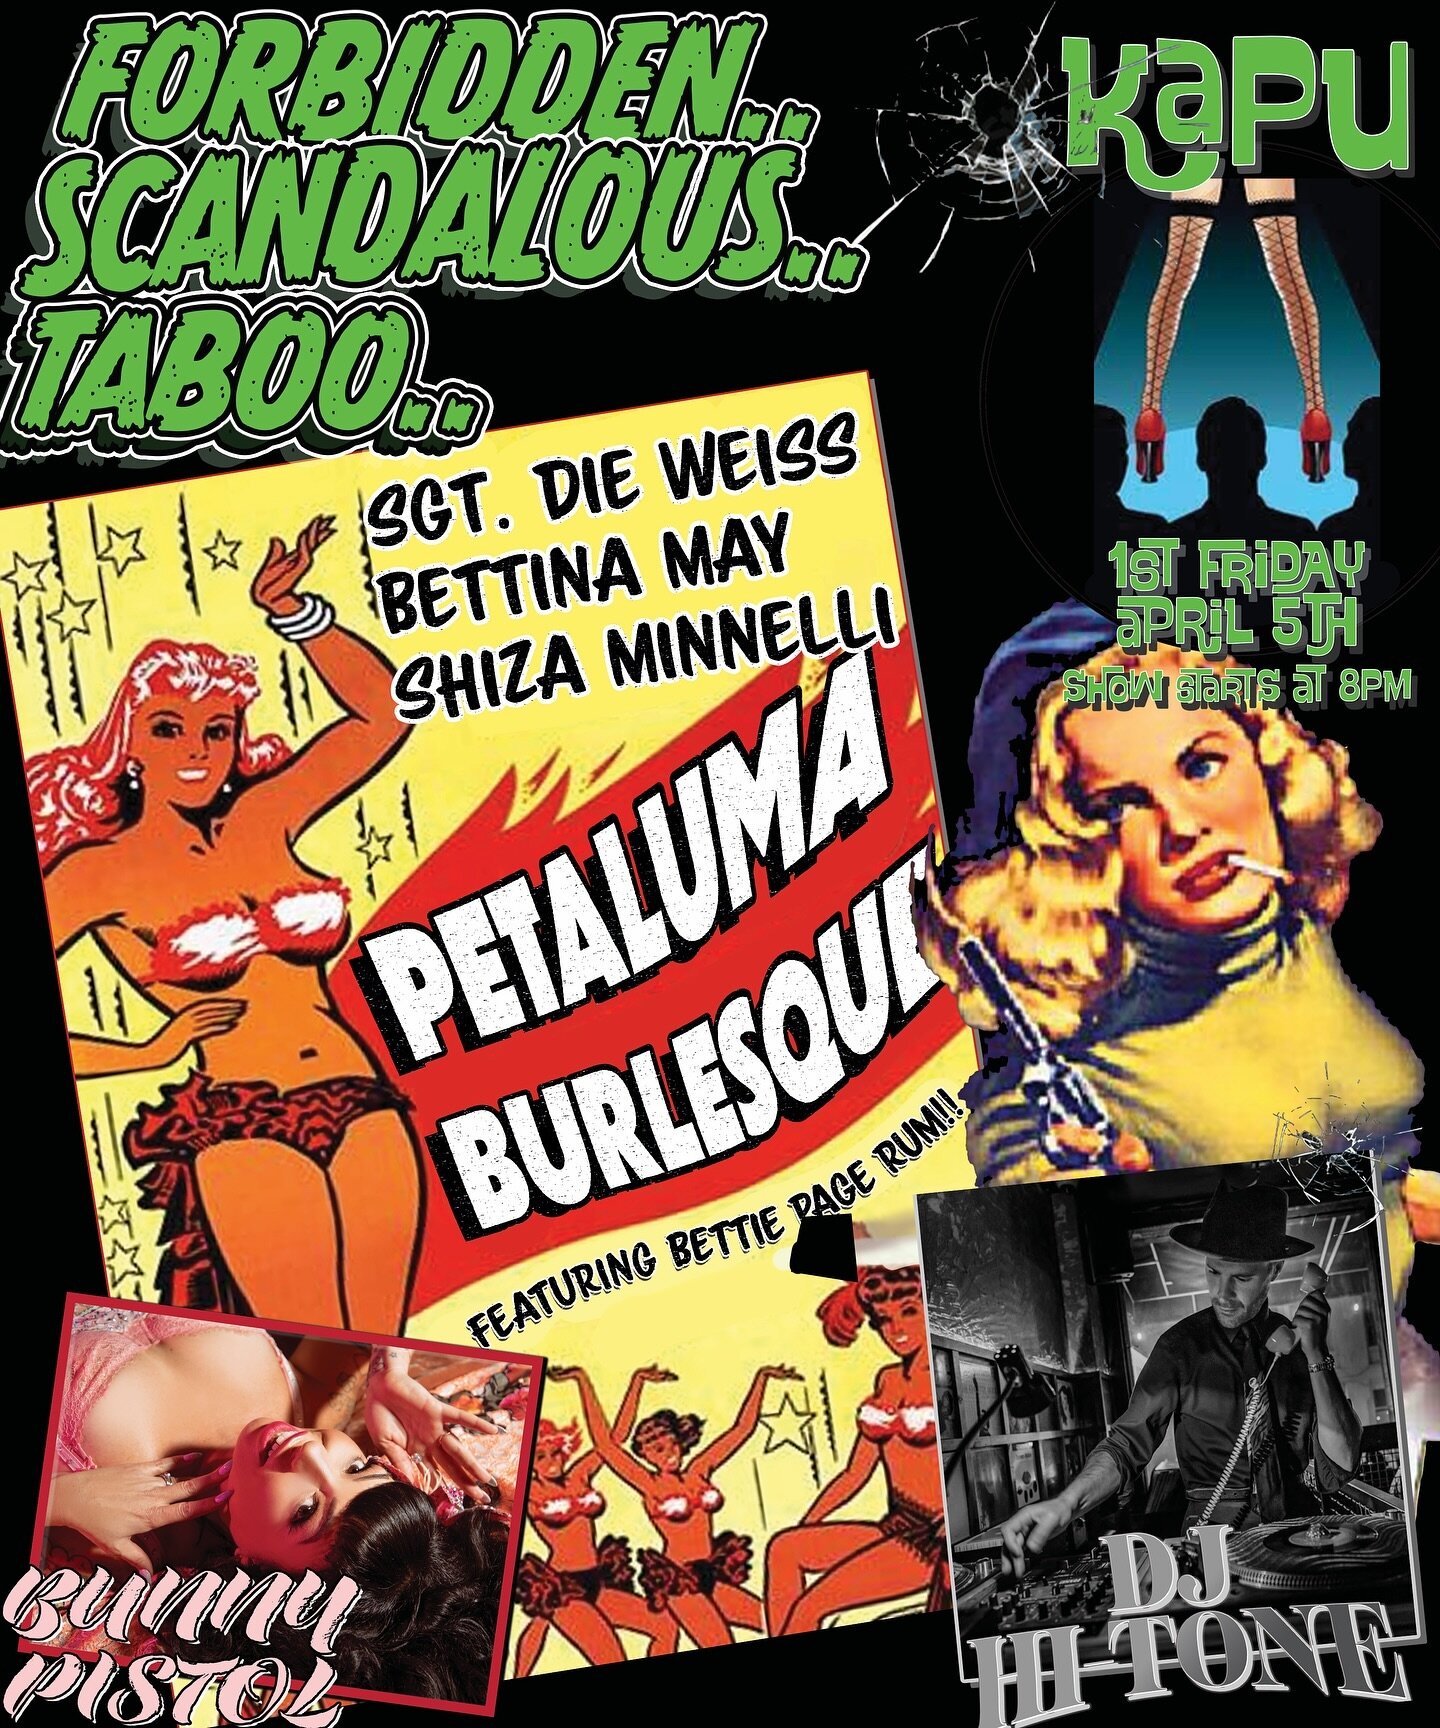 🗓️Mark your calendars!!🗓️ 

1st Fridays are rolling on and we&rsquo;re hosting our first burlesque show! 💃🏽 April 5th at 5pm!

We&rsquo;re so excited to bring @diewies @bettina_may @shizaminelly @bettiepagerum @bunnypistol to Petaluma! and of cou